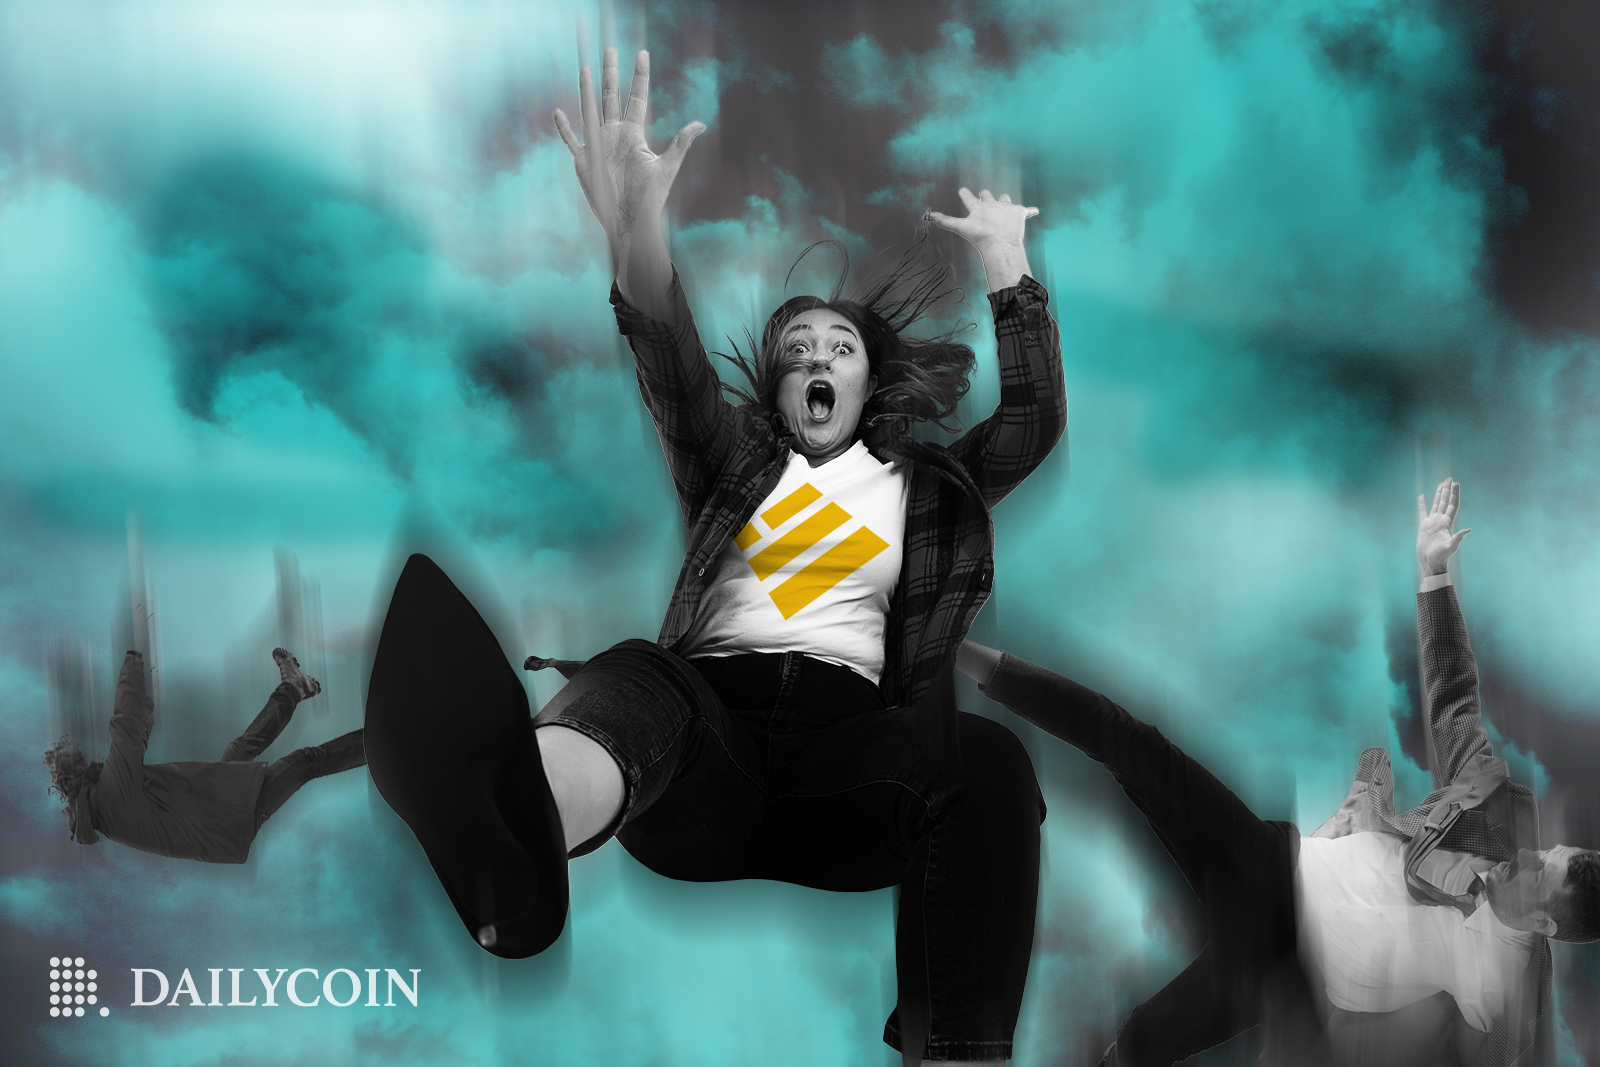 People falling from the sky with the main person wearing shirt with the Binance logo